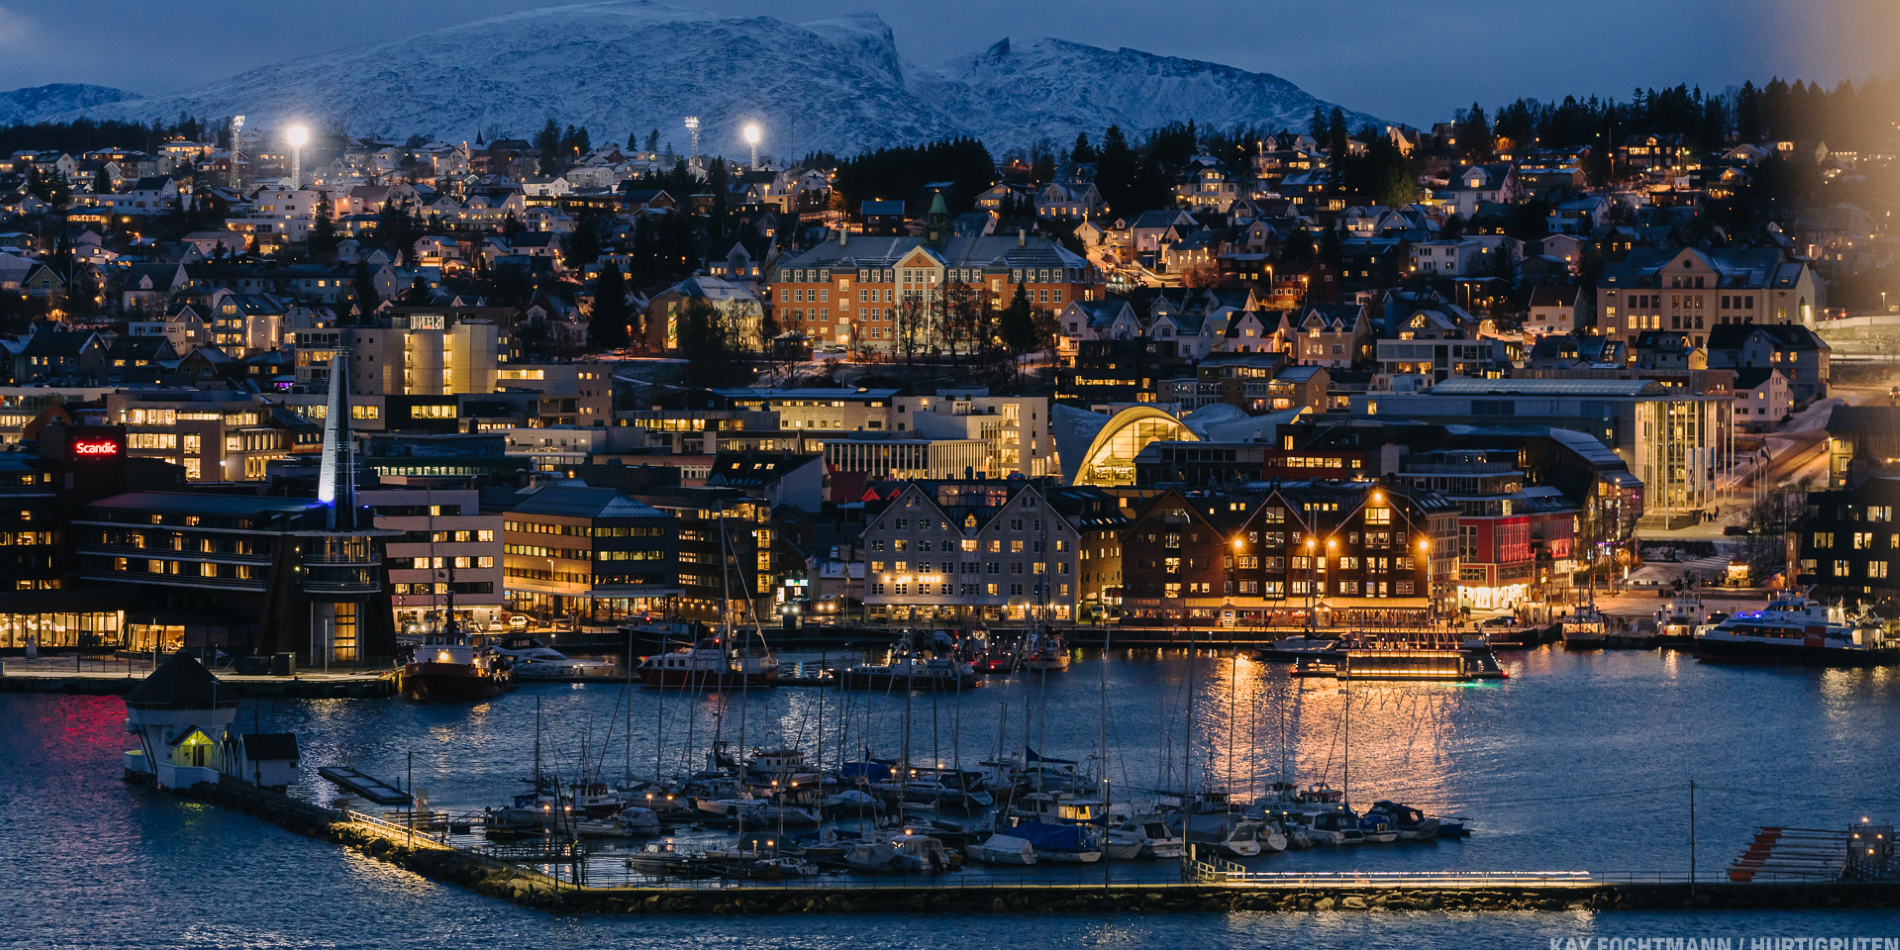 Photo of Tromsø at night. The vibrant city lights are glowing